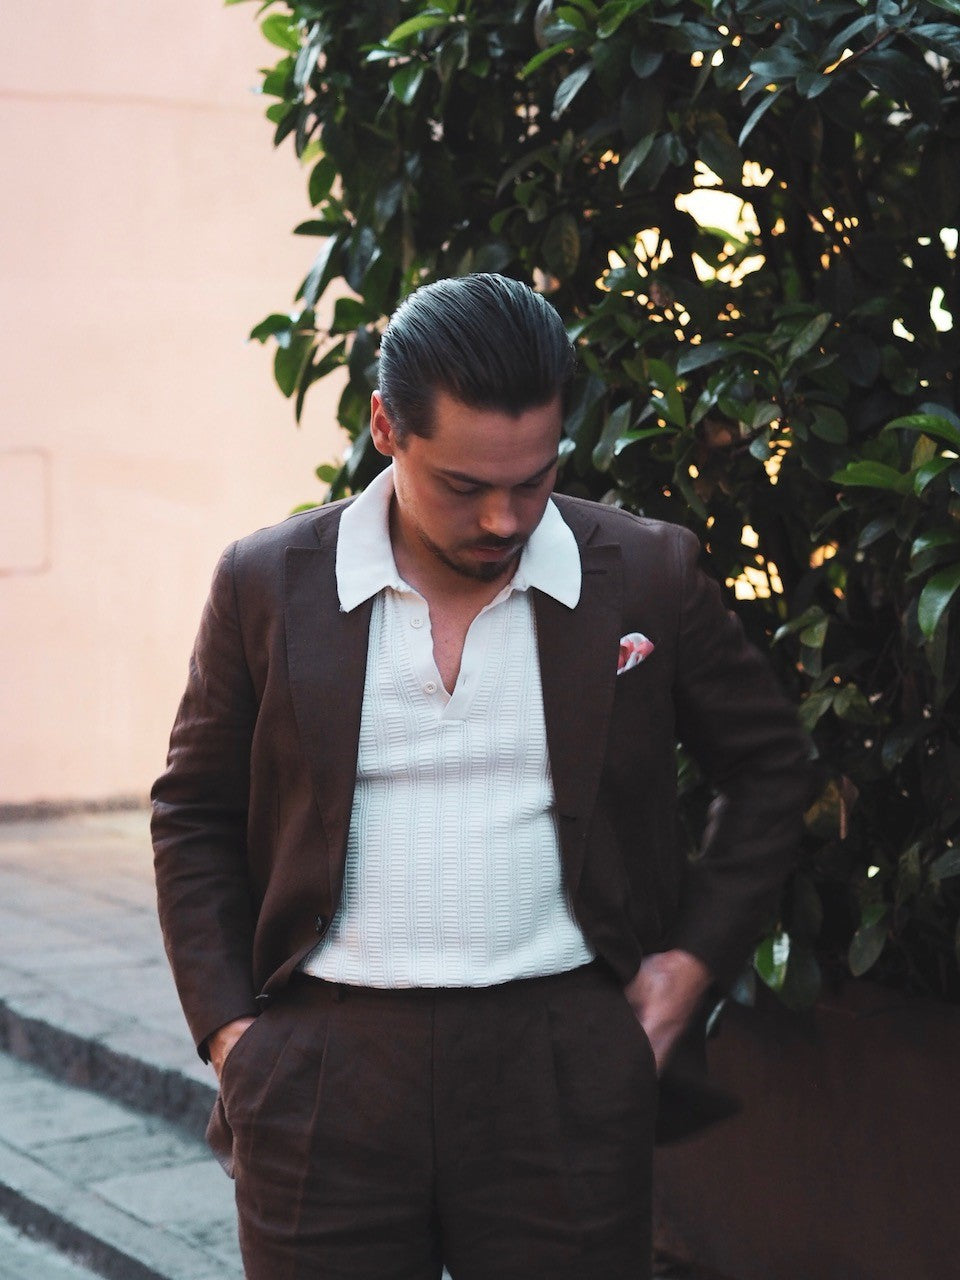 White knitted polo shirt with brown linen suit